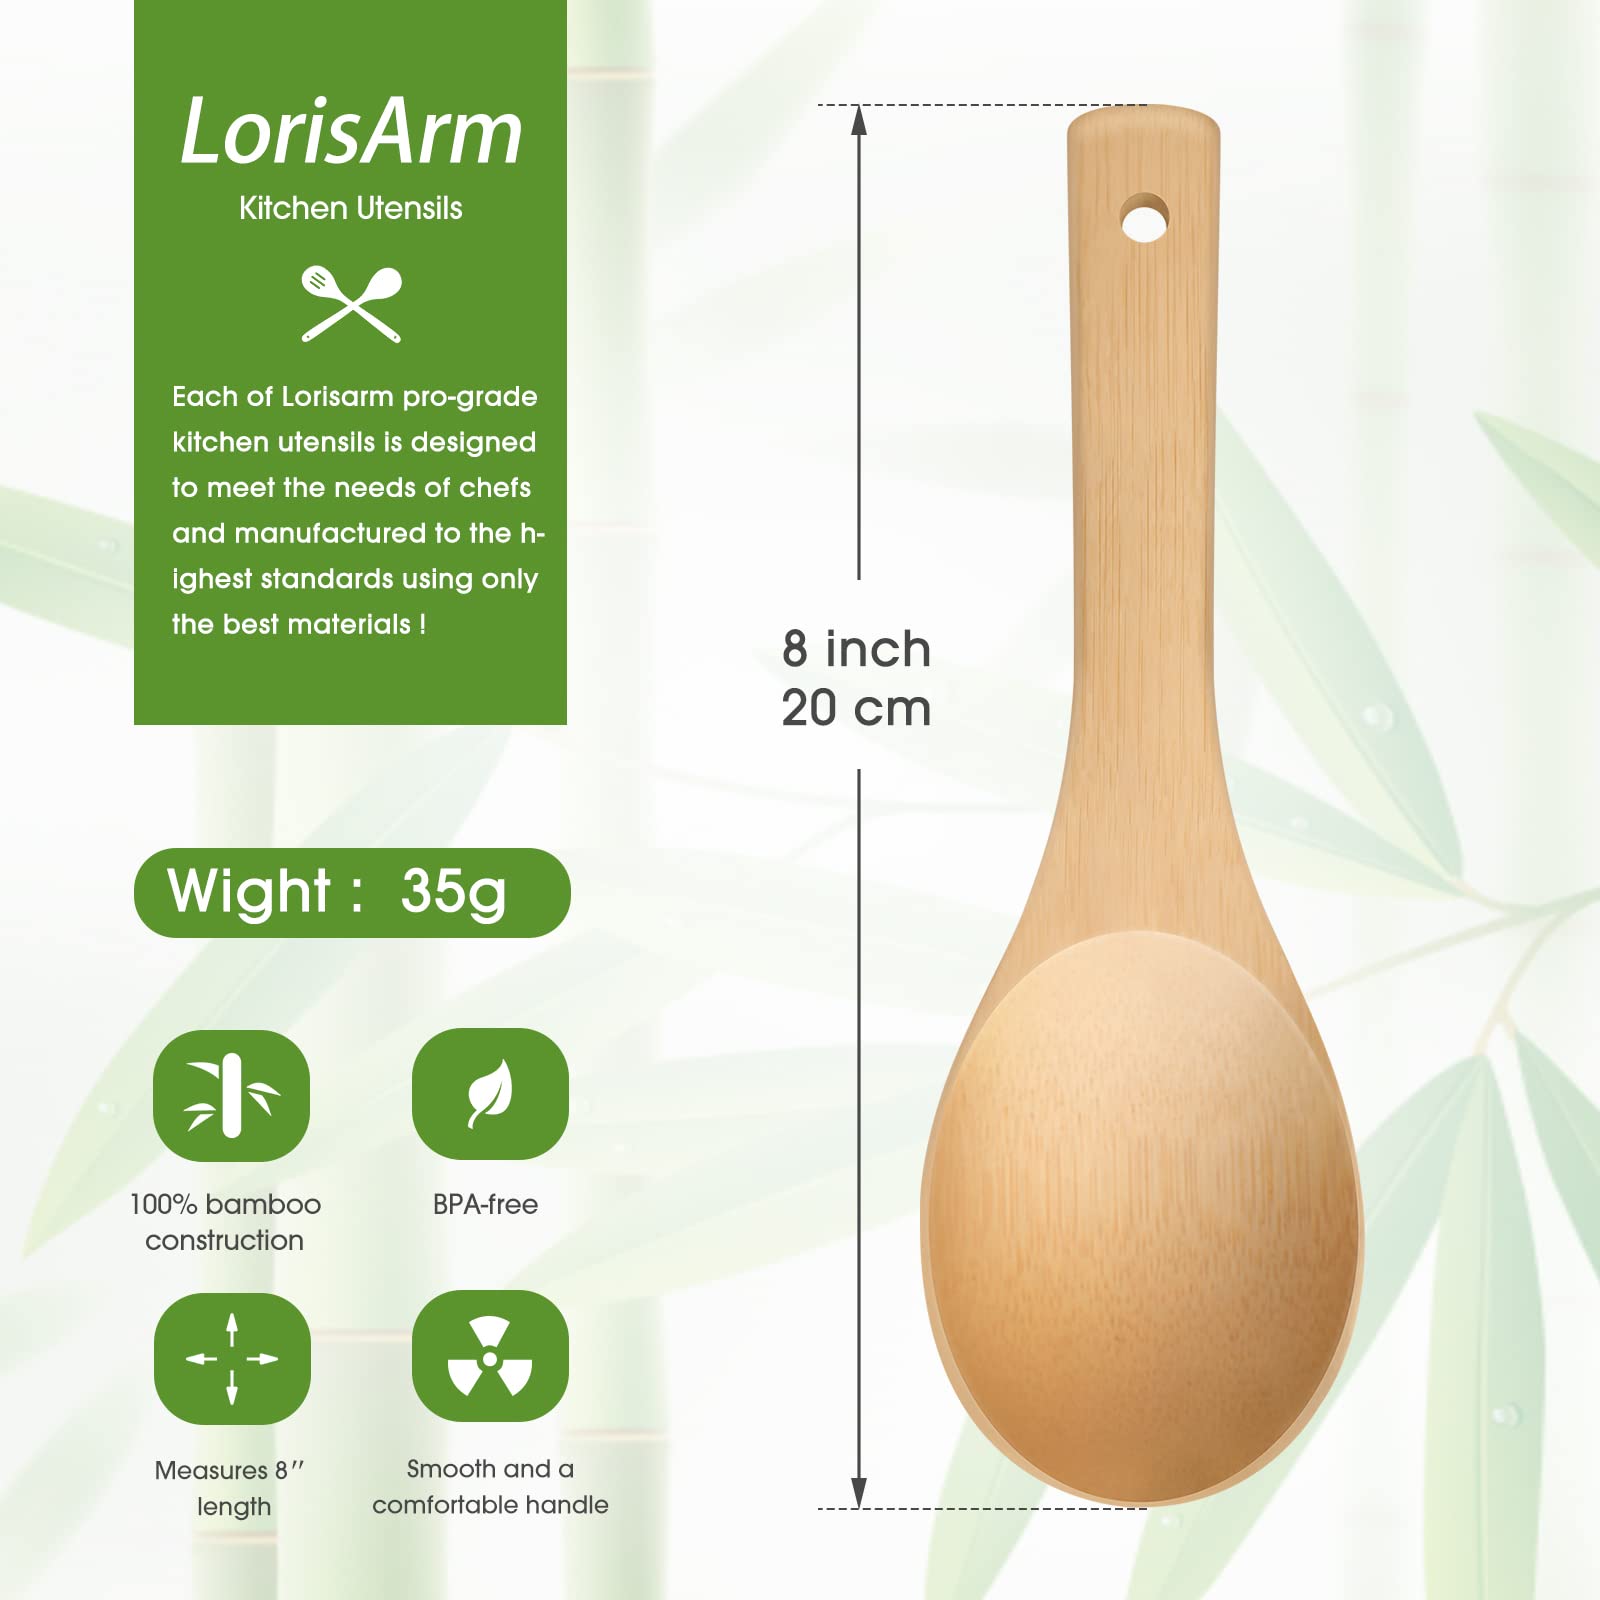 LorisArm Bamboo Rice paddle 2pcs Wooden Spoons for Serving Utensil, Wood rice scooper spoon Kitchen Utensil Set.